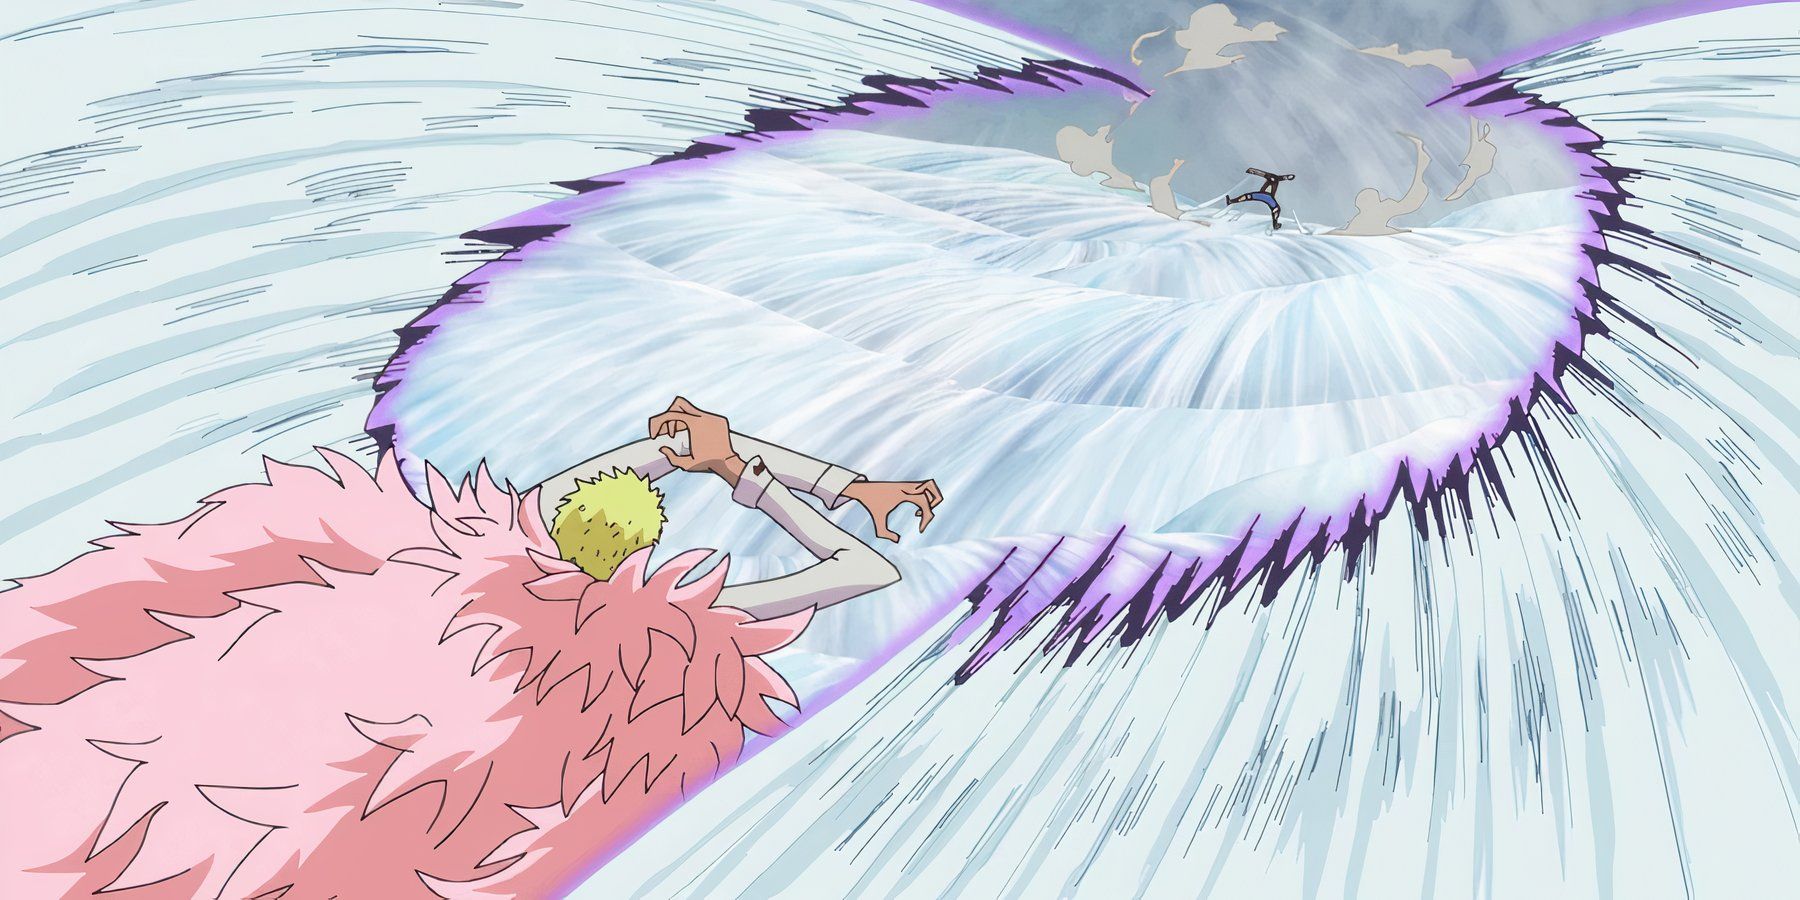 Doflamingo uses Flap Thread to attack Luffy during their final fight in One Piece's Dressrosa Arc.